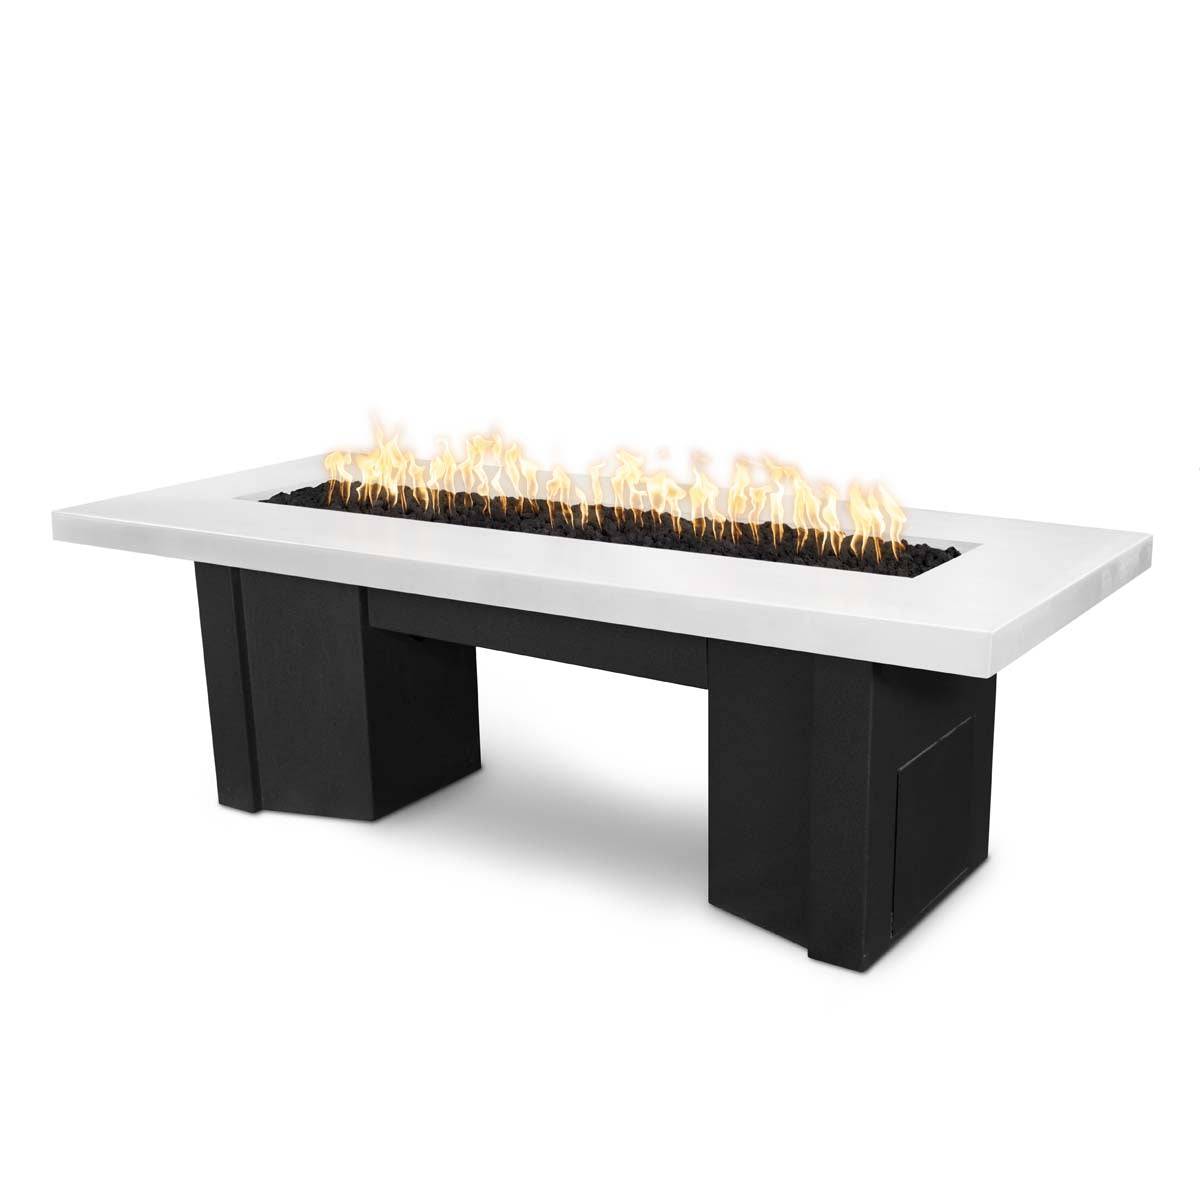 The Outdoor Plus Alameda Fire Table Powder Coated White Top & Black Base OPT-ALMPCXX-BWC - Serenity Provision